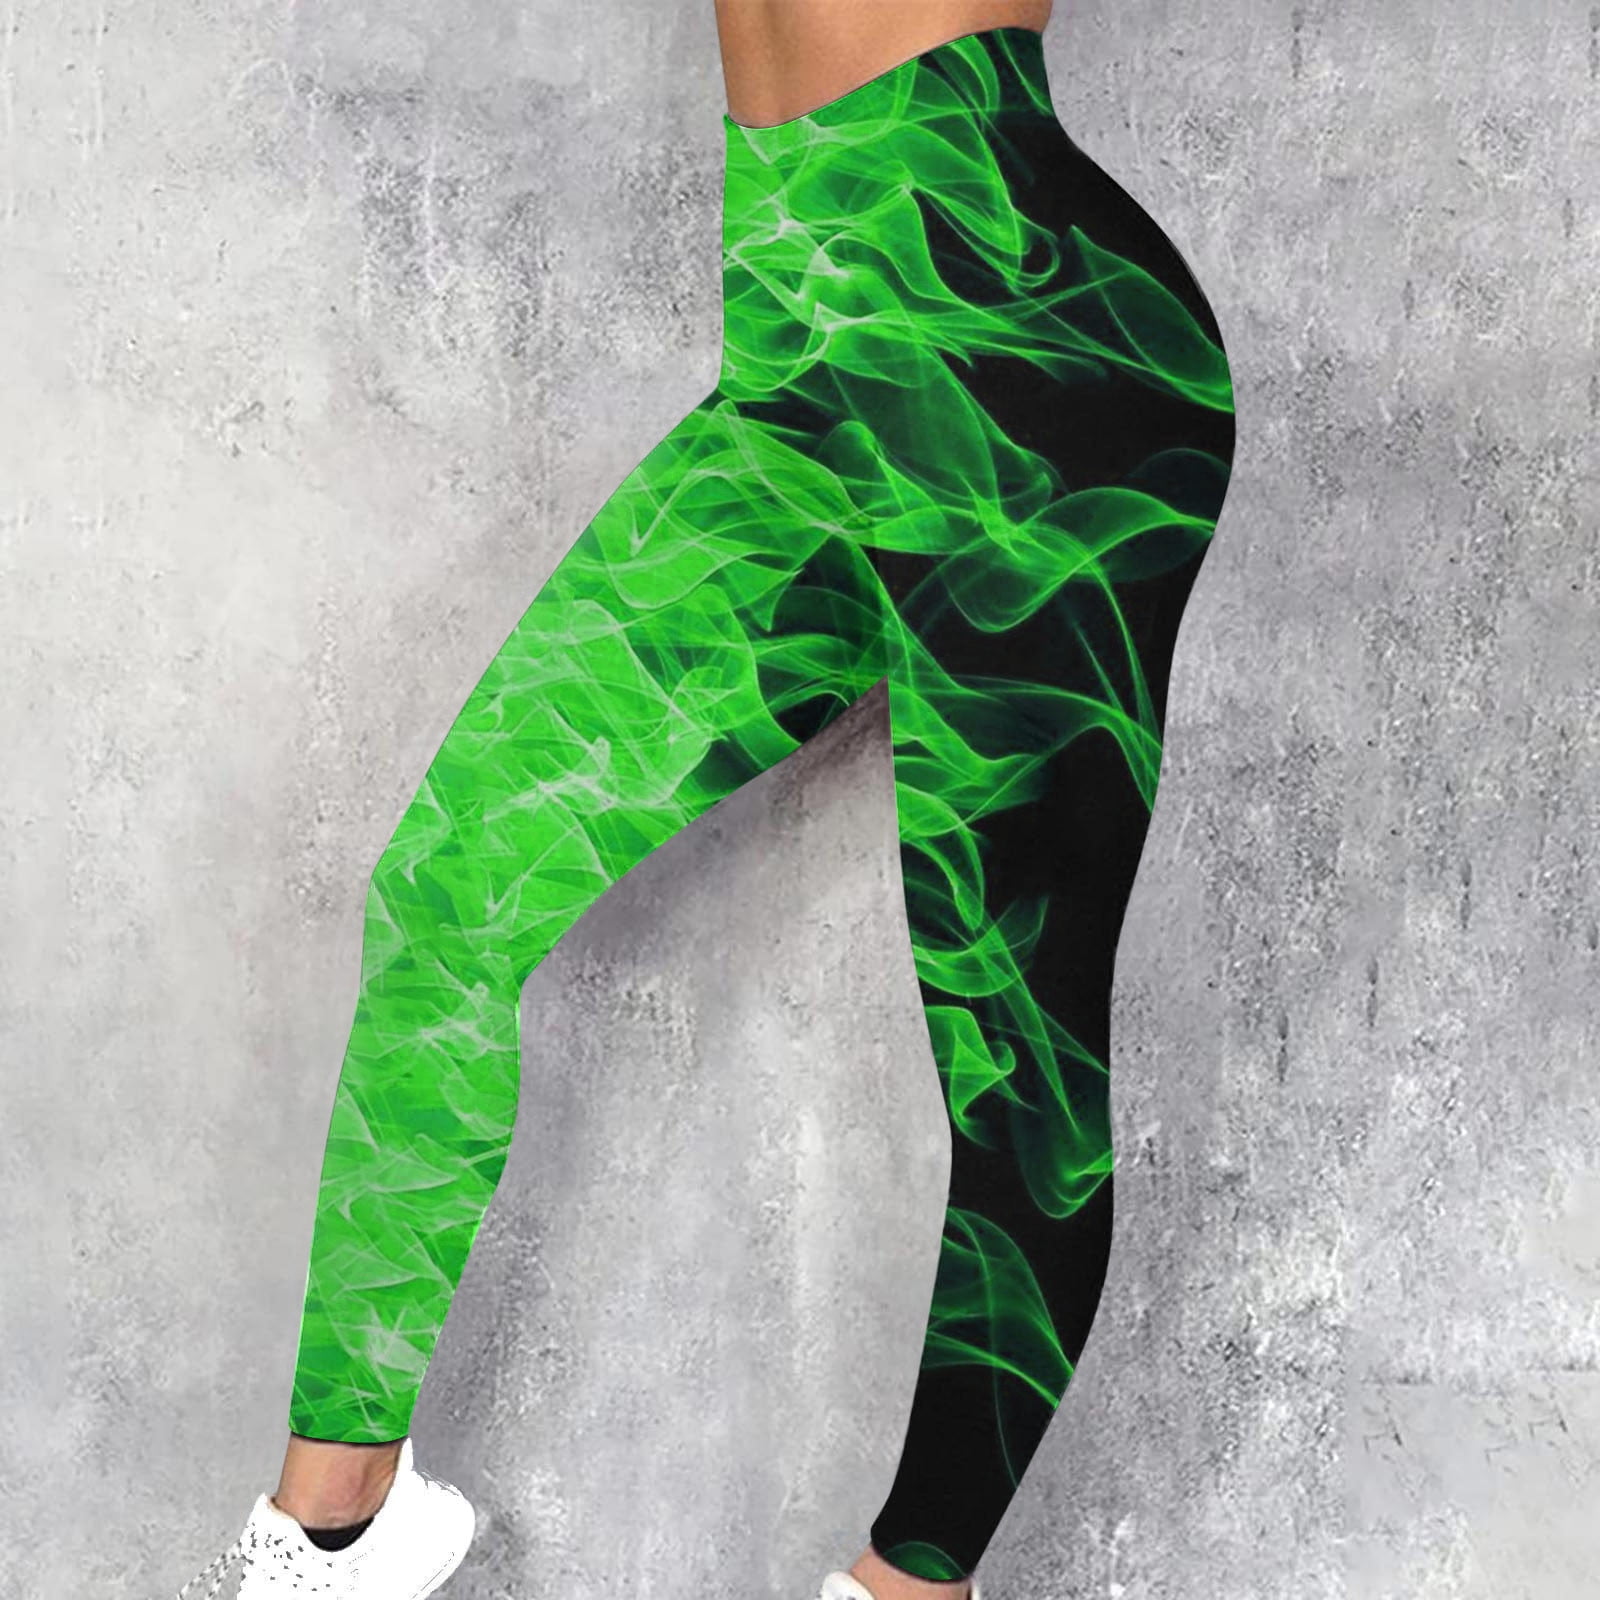 Earthy Camoflex - Nature-inspired Athletic Wear